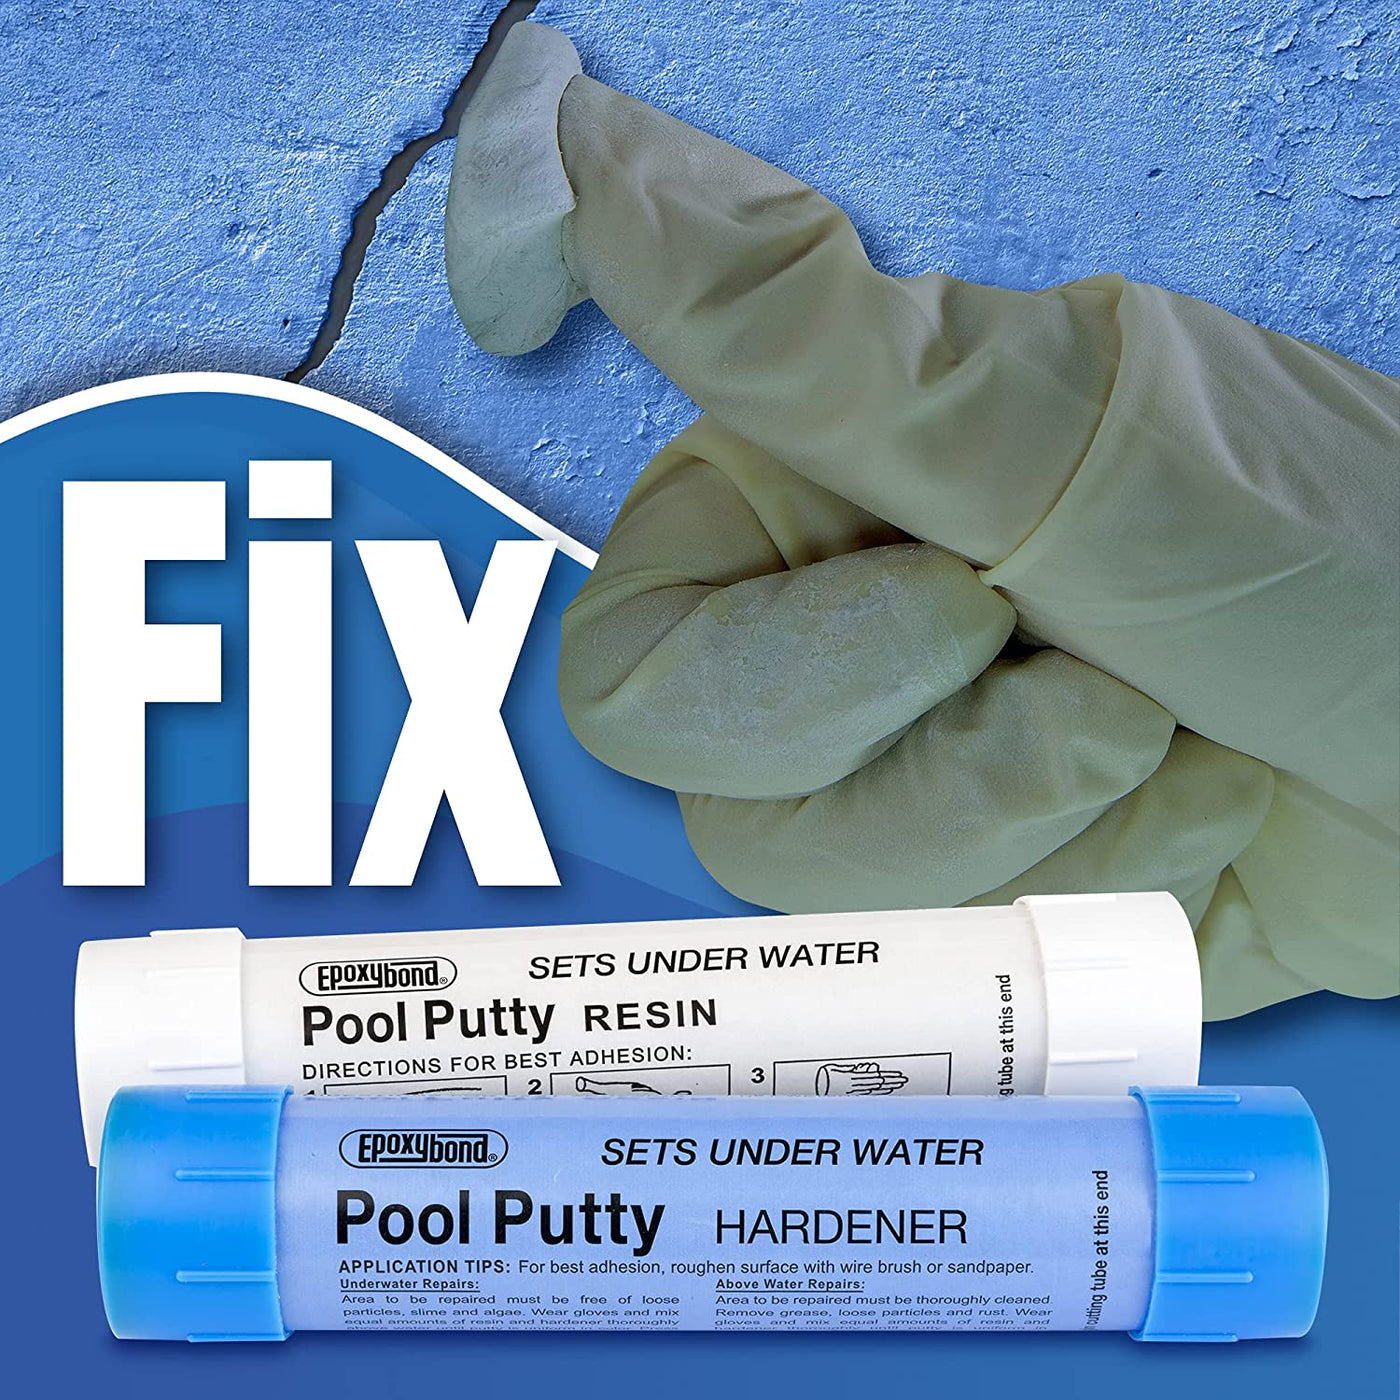 Epoxybond Pool Putty 2-Part Set | Swimming Pool & Spa Repair | Fix Cracks Leaks Underwater or Above | Concrete, Fiberglass & Variety of Other Surfaces | by Atlas Minerals